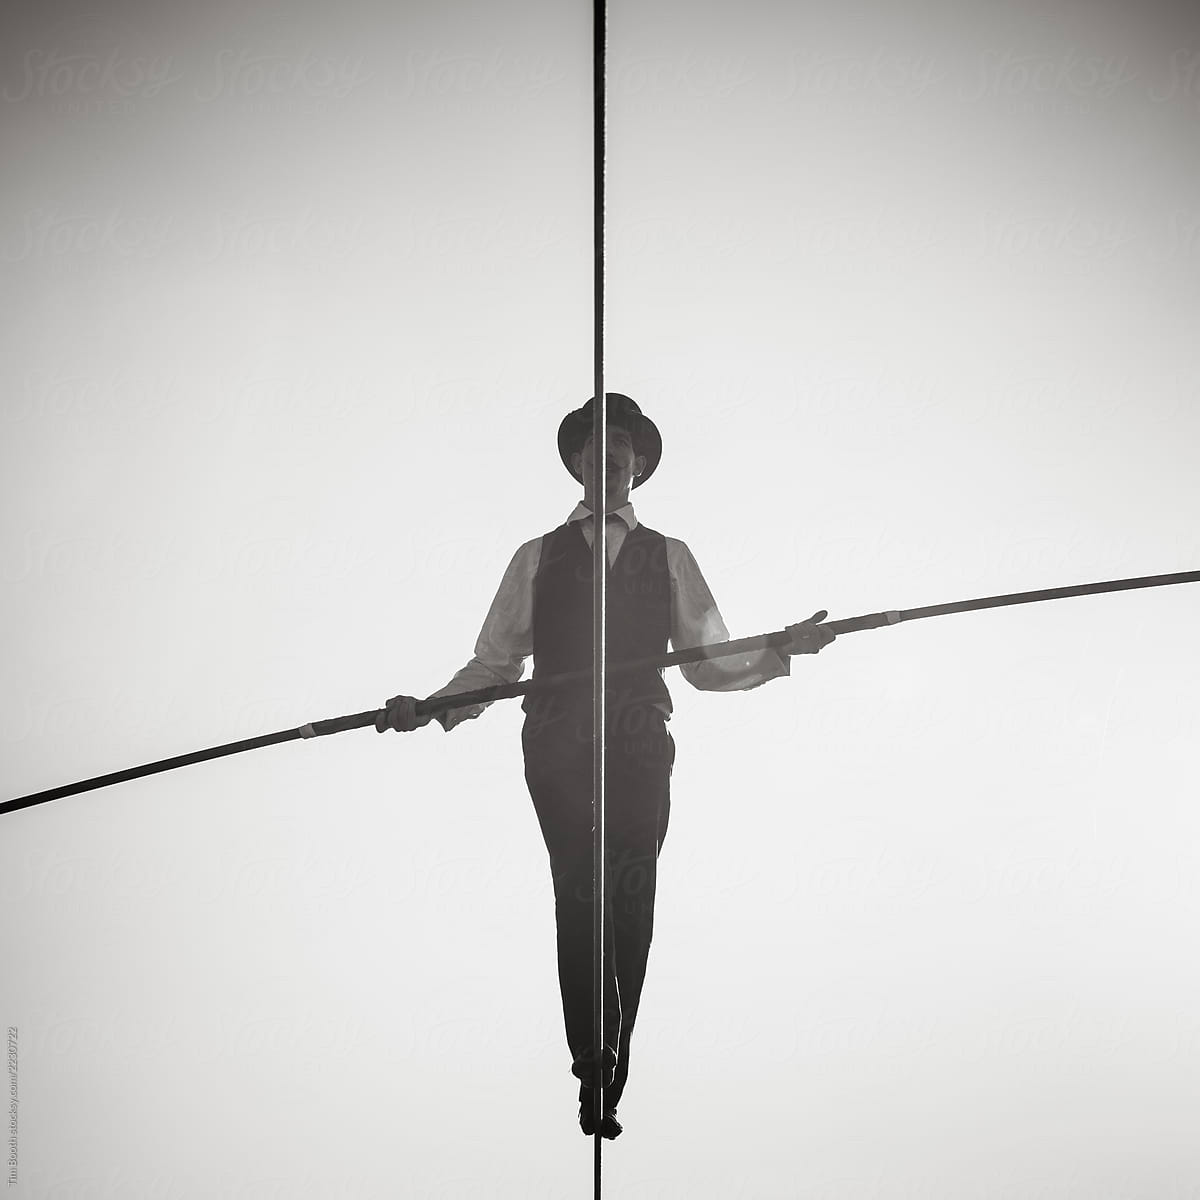 A Monochrome Image Of A Tightrope Walker Stocksy United